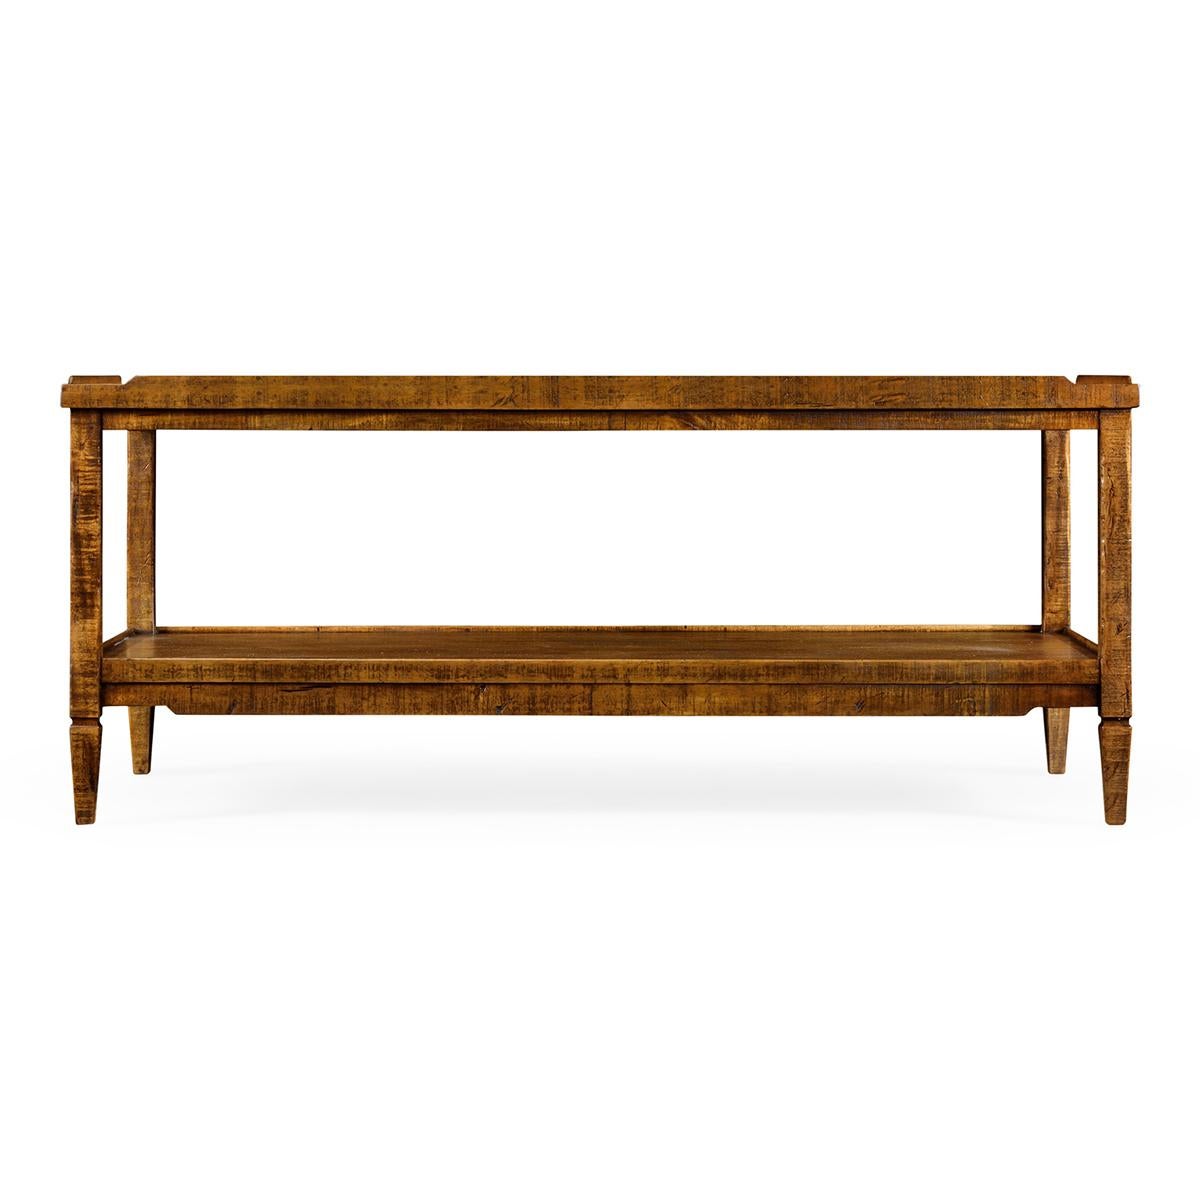 French Rustic country coffee table in a distressed walnut finish with a wooden gallery, square tapered legs and a lower tier shelf.

Dimensions: 48